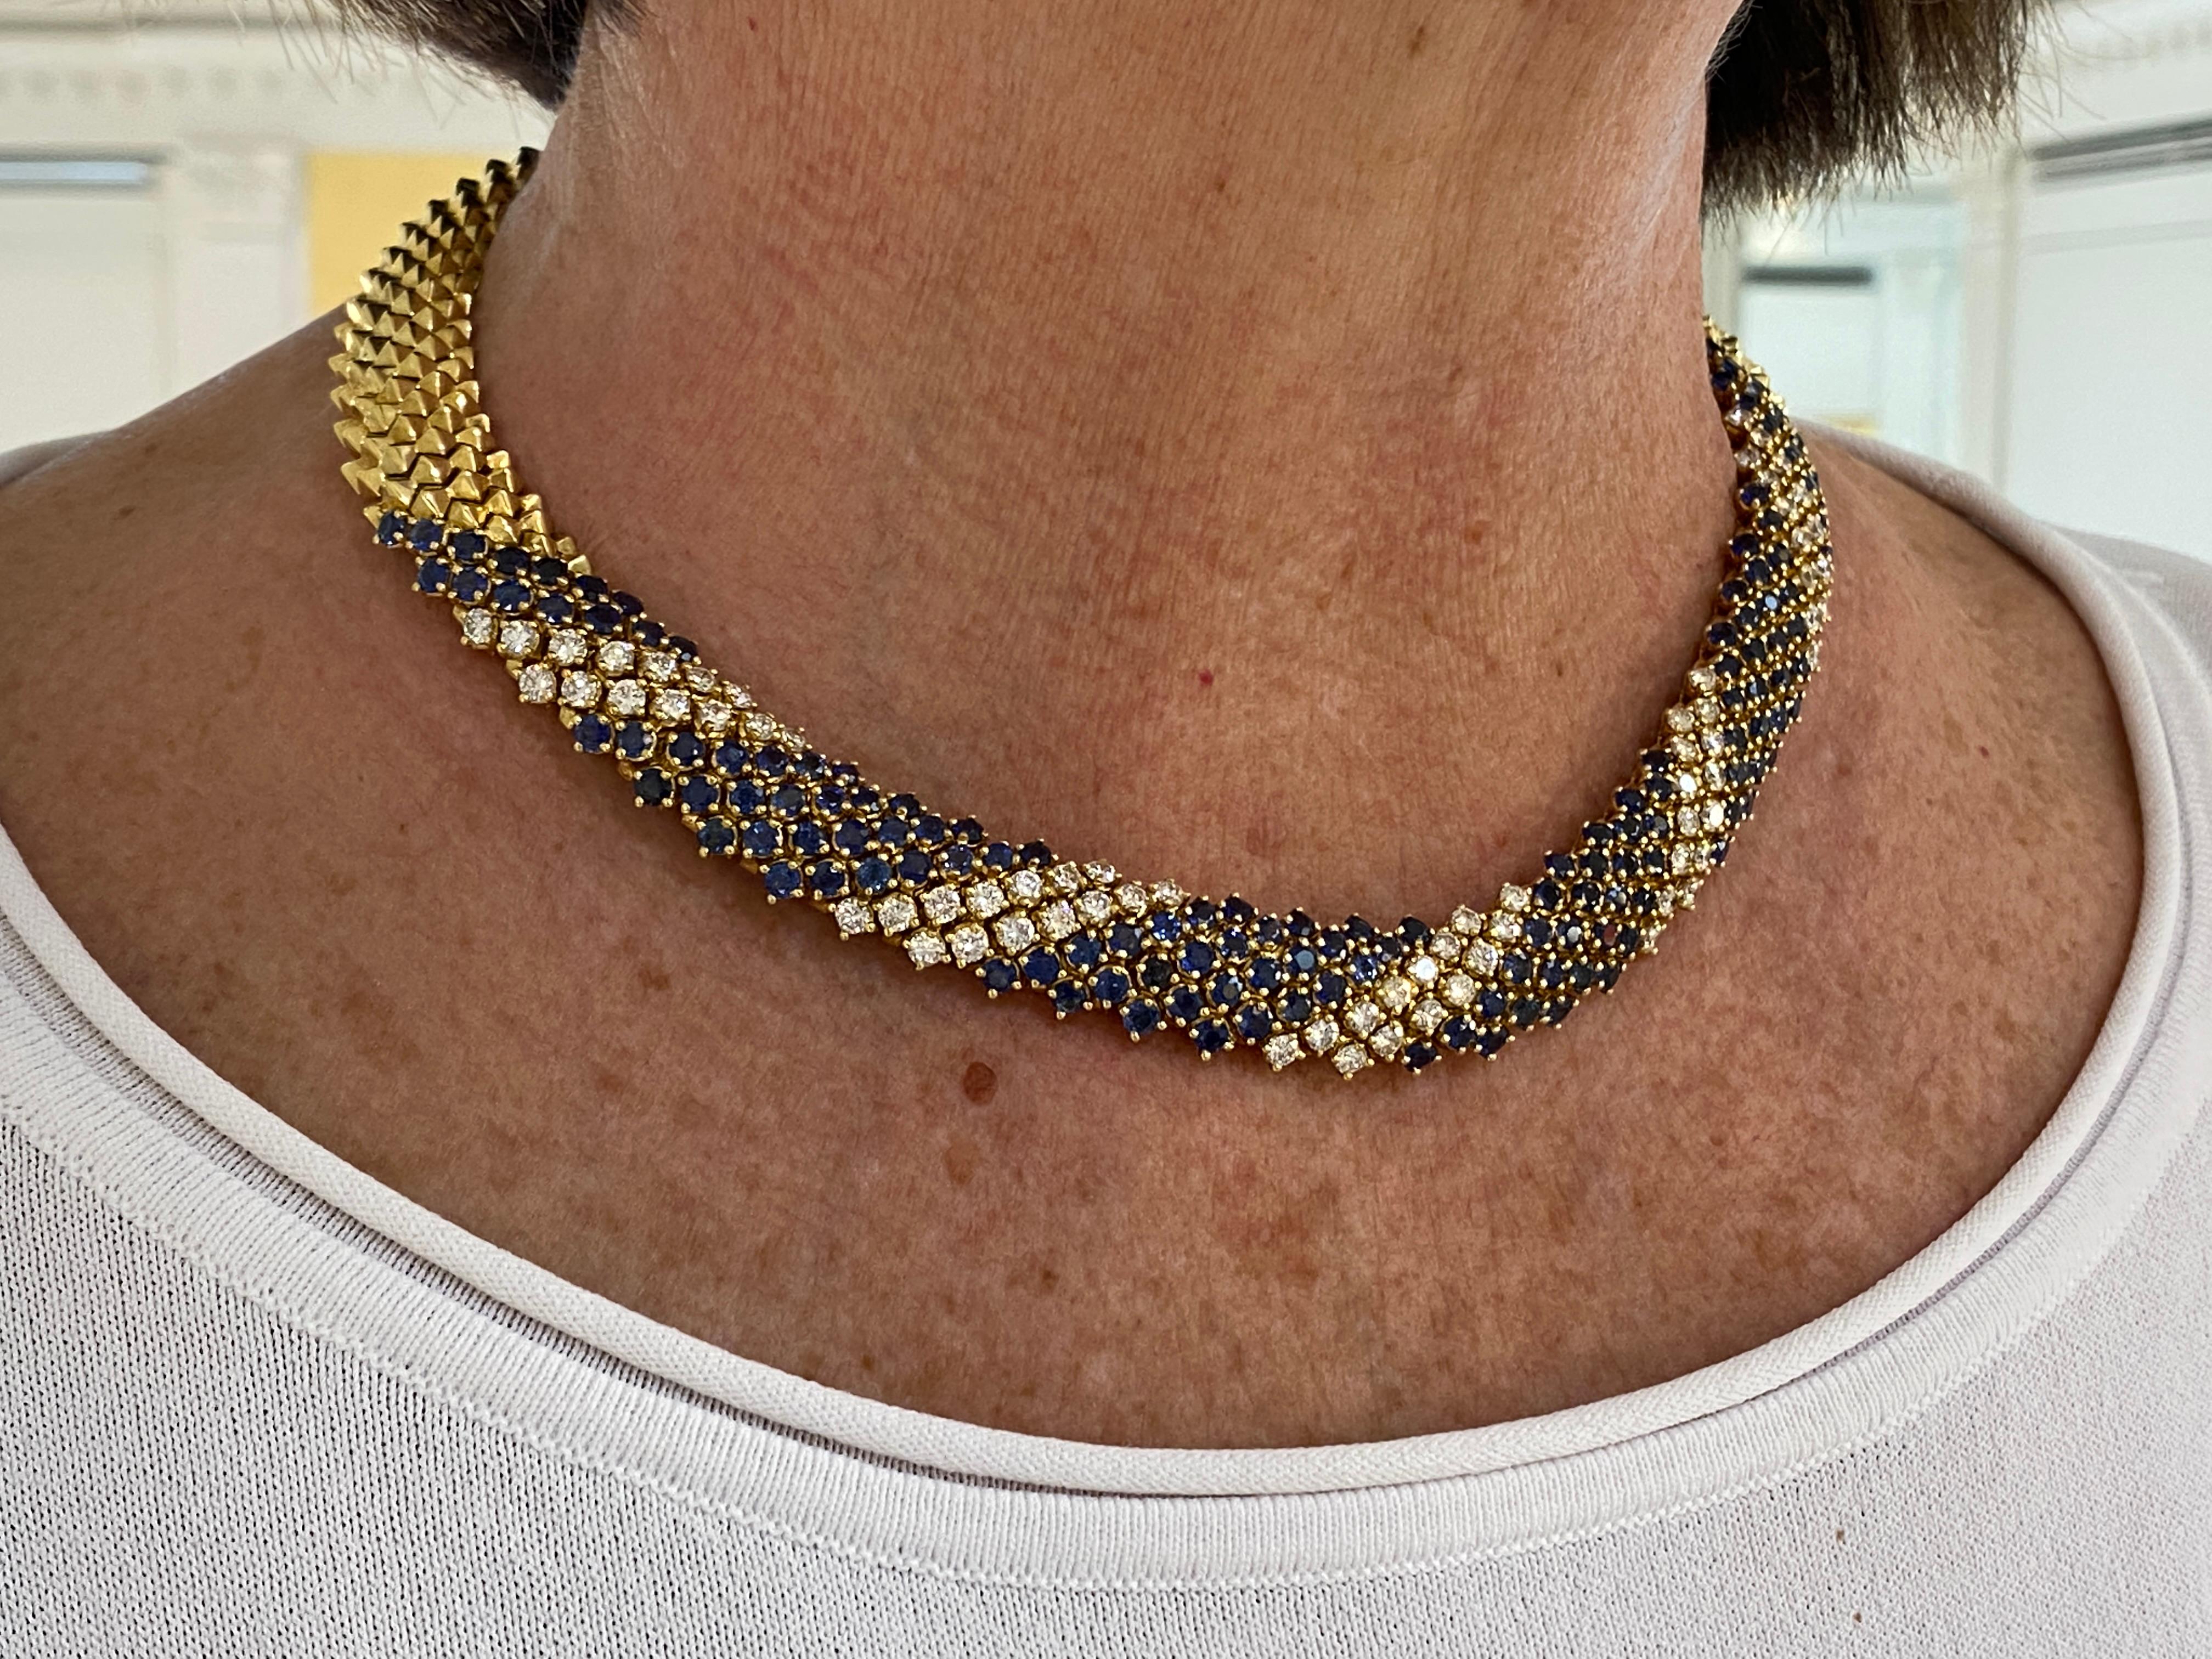 Unique Snake 18kt Yellow Gold Necklace 23 Ct Blue Sapphires 7.42 White Diamonds For Sale 3